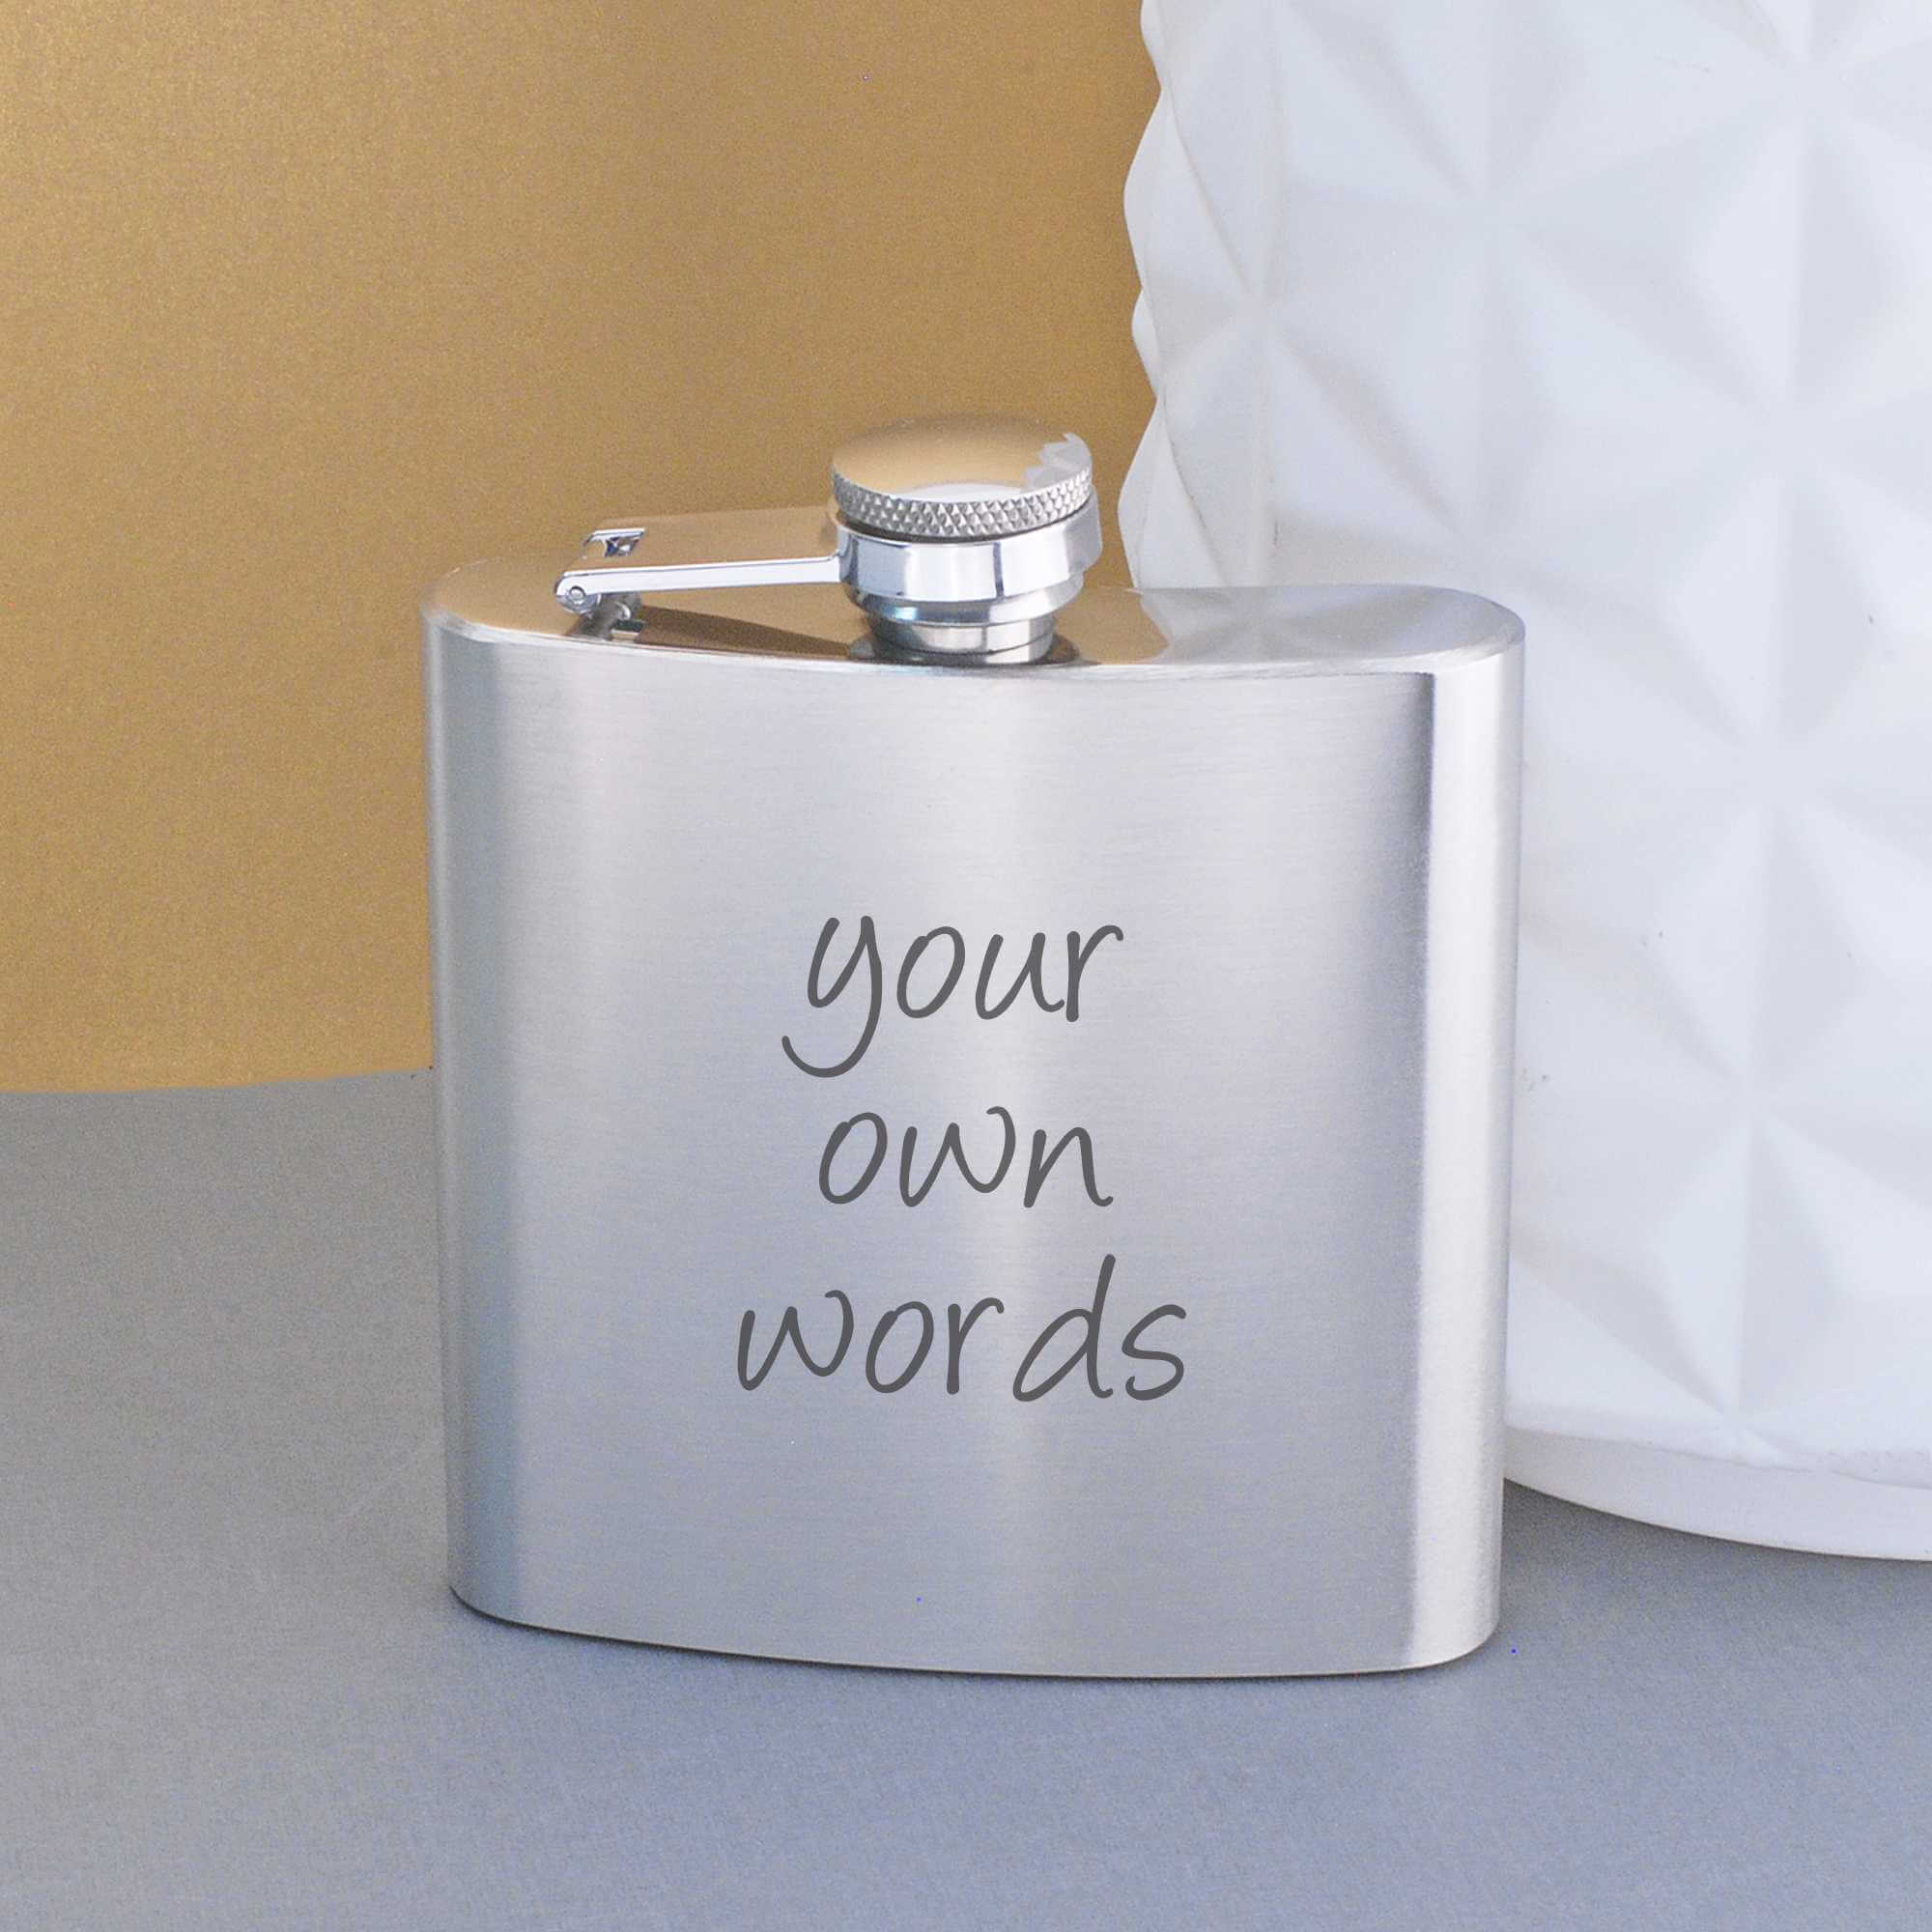 Flask Engraved with Your Own Words